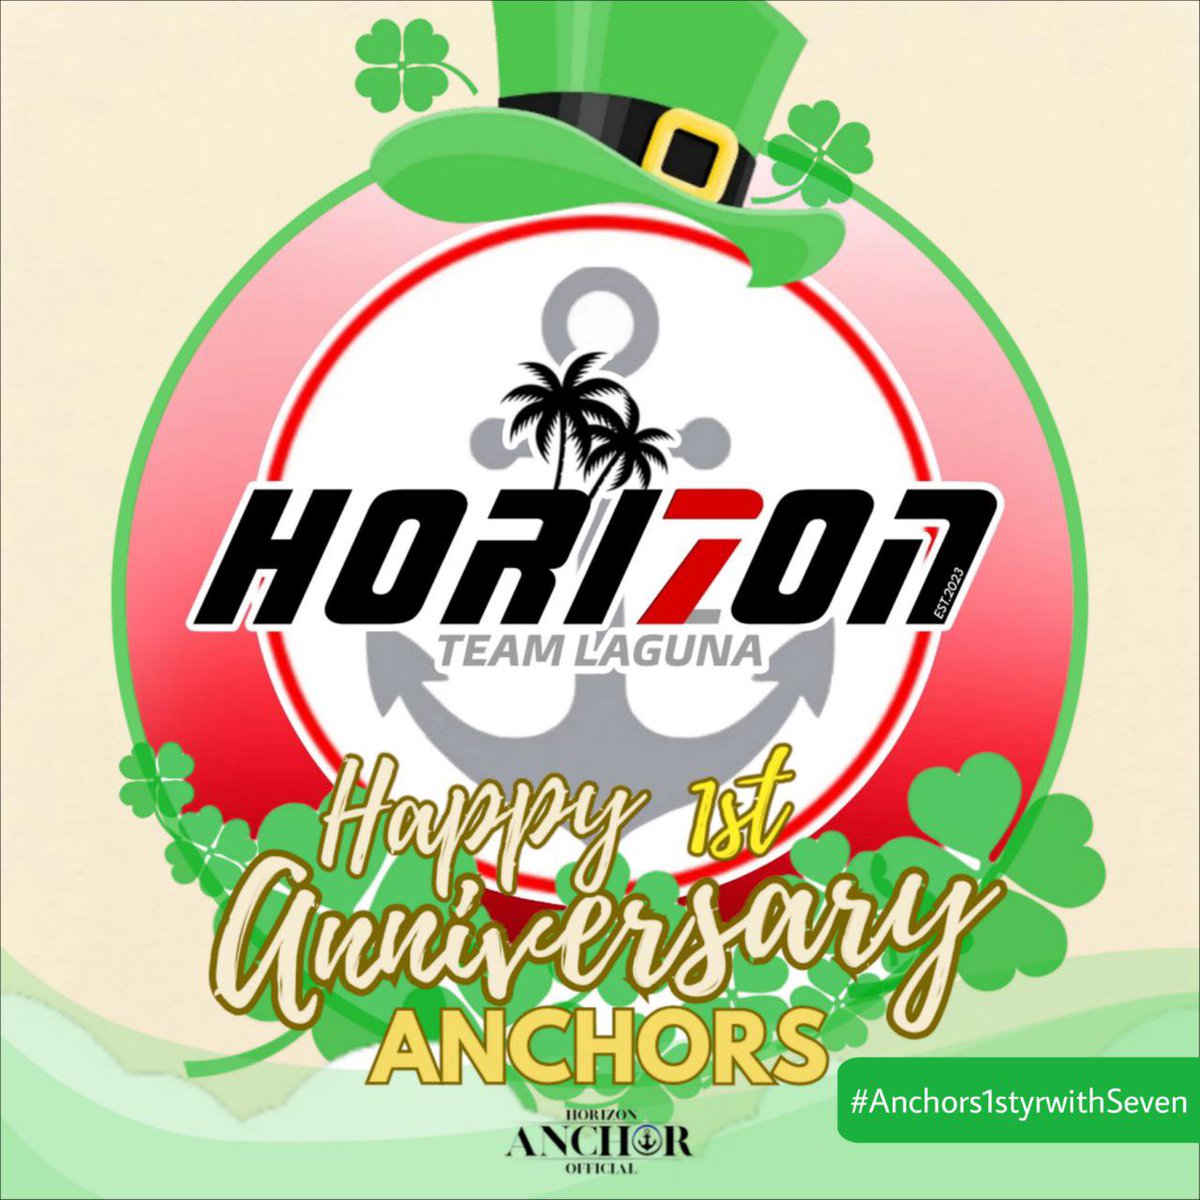 Hi. We HORI7ON TEAM LAGUNA, an anchor of HORI7ON, and we feel lucky to be part of this family.

HAPPY ANNIVERSARY ANCHORS

#Anchors1styrwithSeven
#HORI7ON #호라이즌 
@HORI7ONofficial